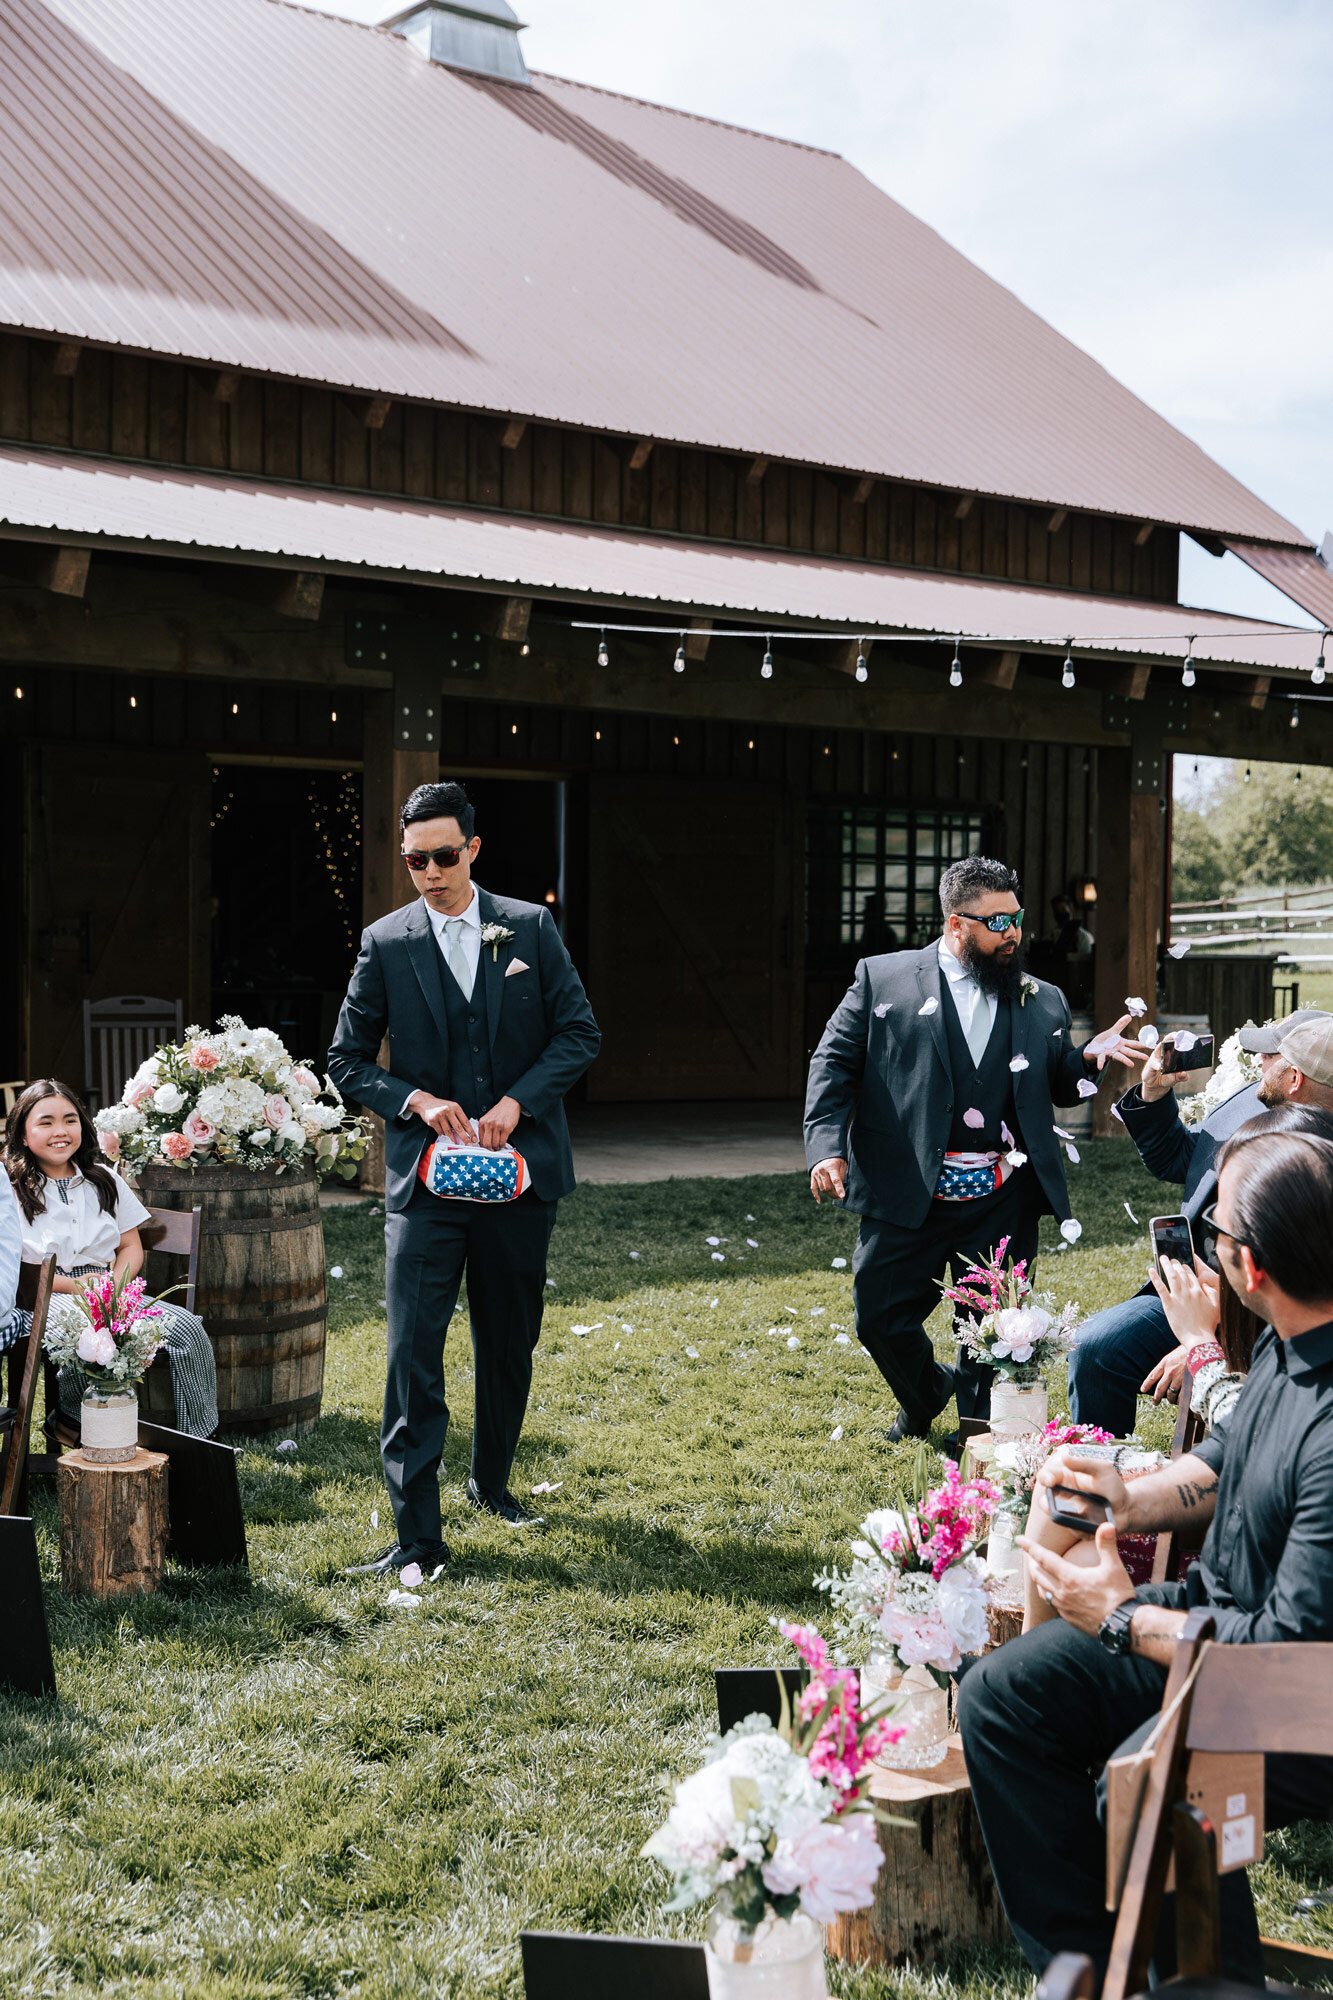  Flower boys walking down the aisle at Quiet Meadow Farms with American fanny packs throwing petals from them by Emily Jenkins Photography. flower guys with fanny packs creative flower girl replacements farm wedding venue #emilyjenkinsphotography #em